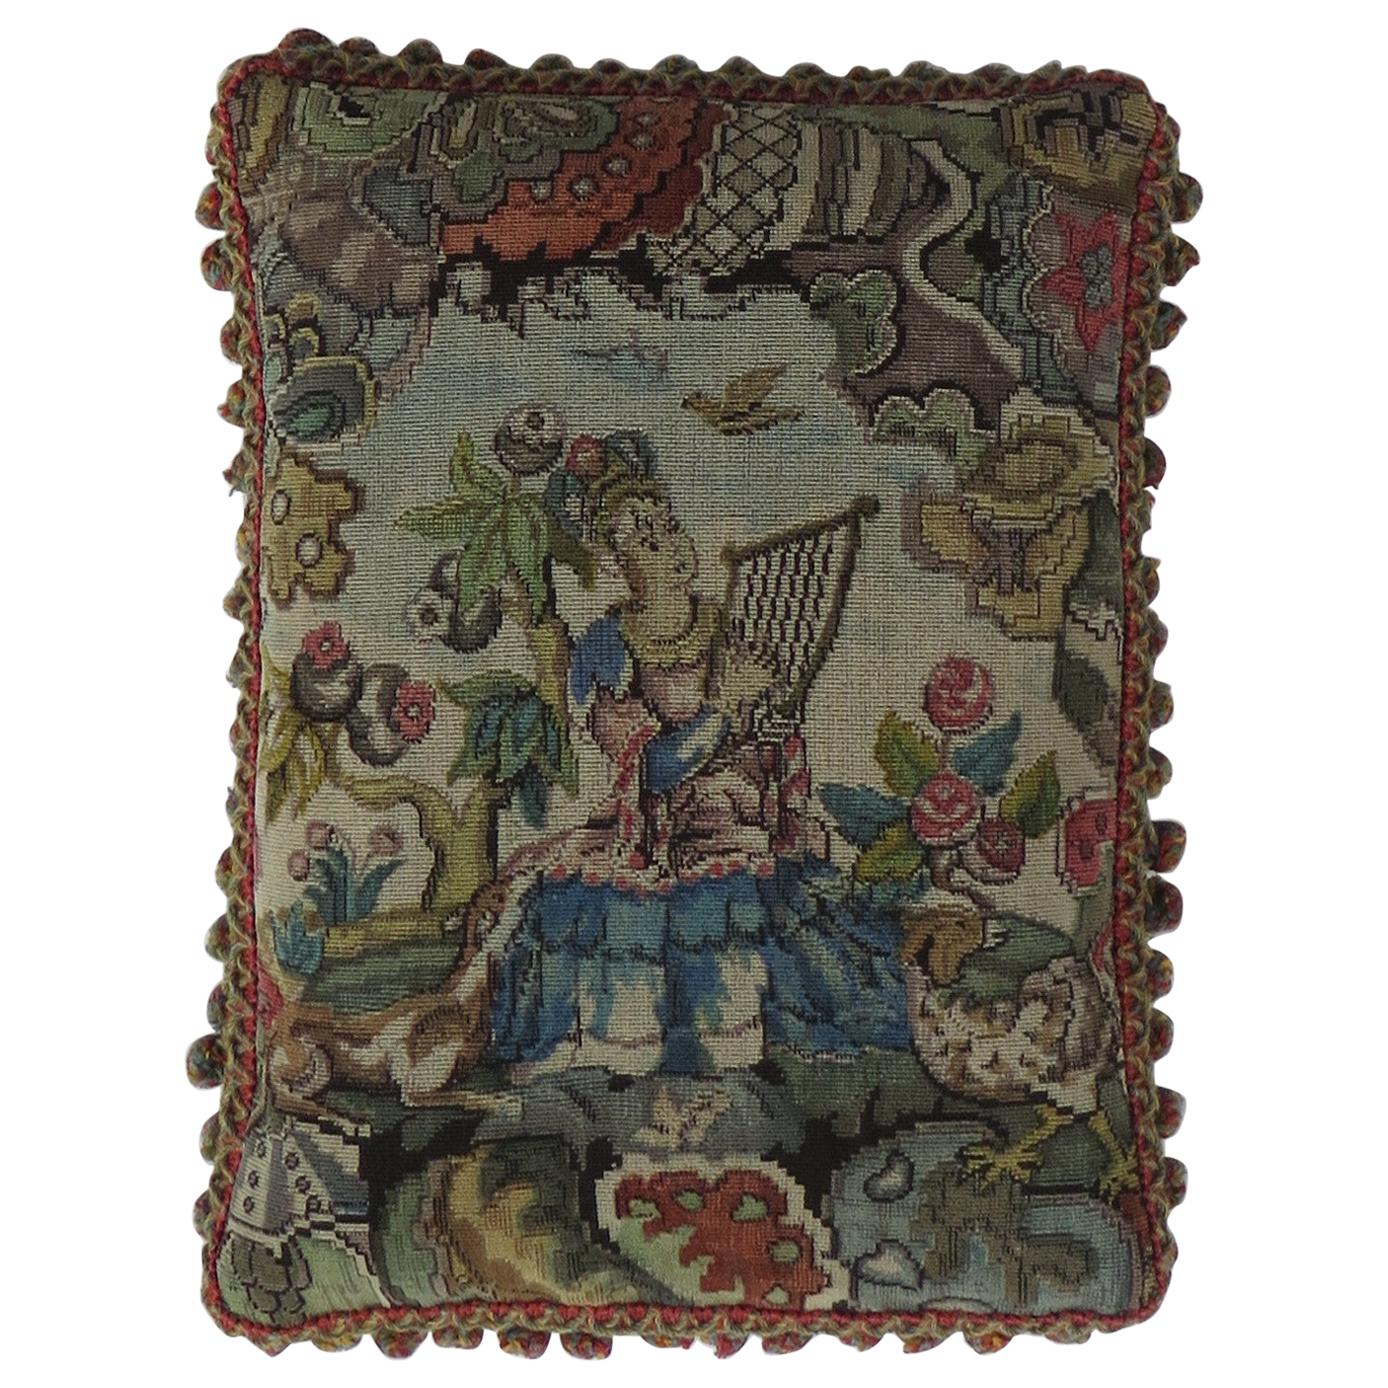 Woven Tapestry Cushion or Pillow in Aubusson style, French, 19th Century